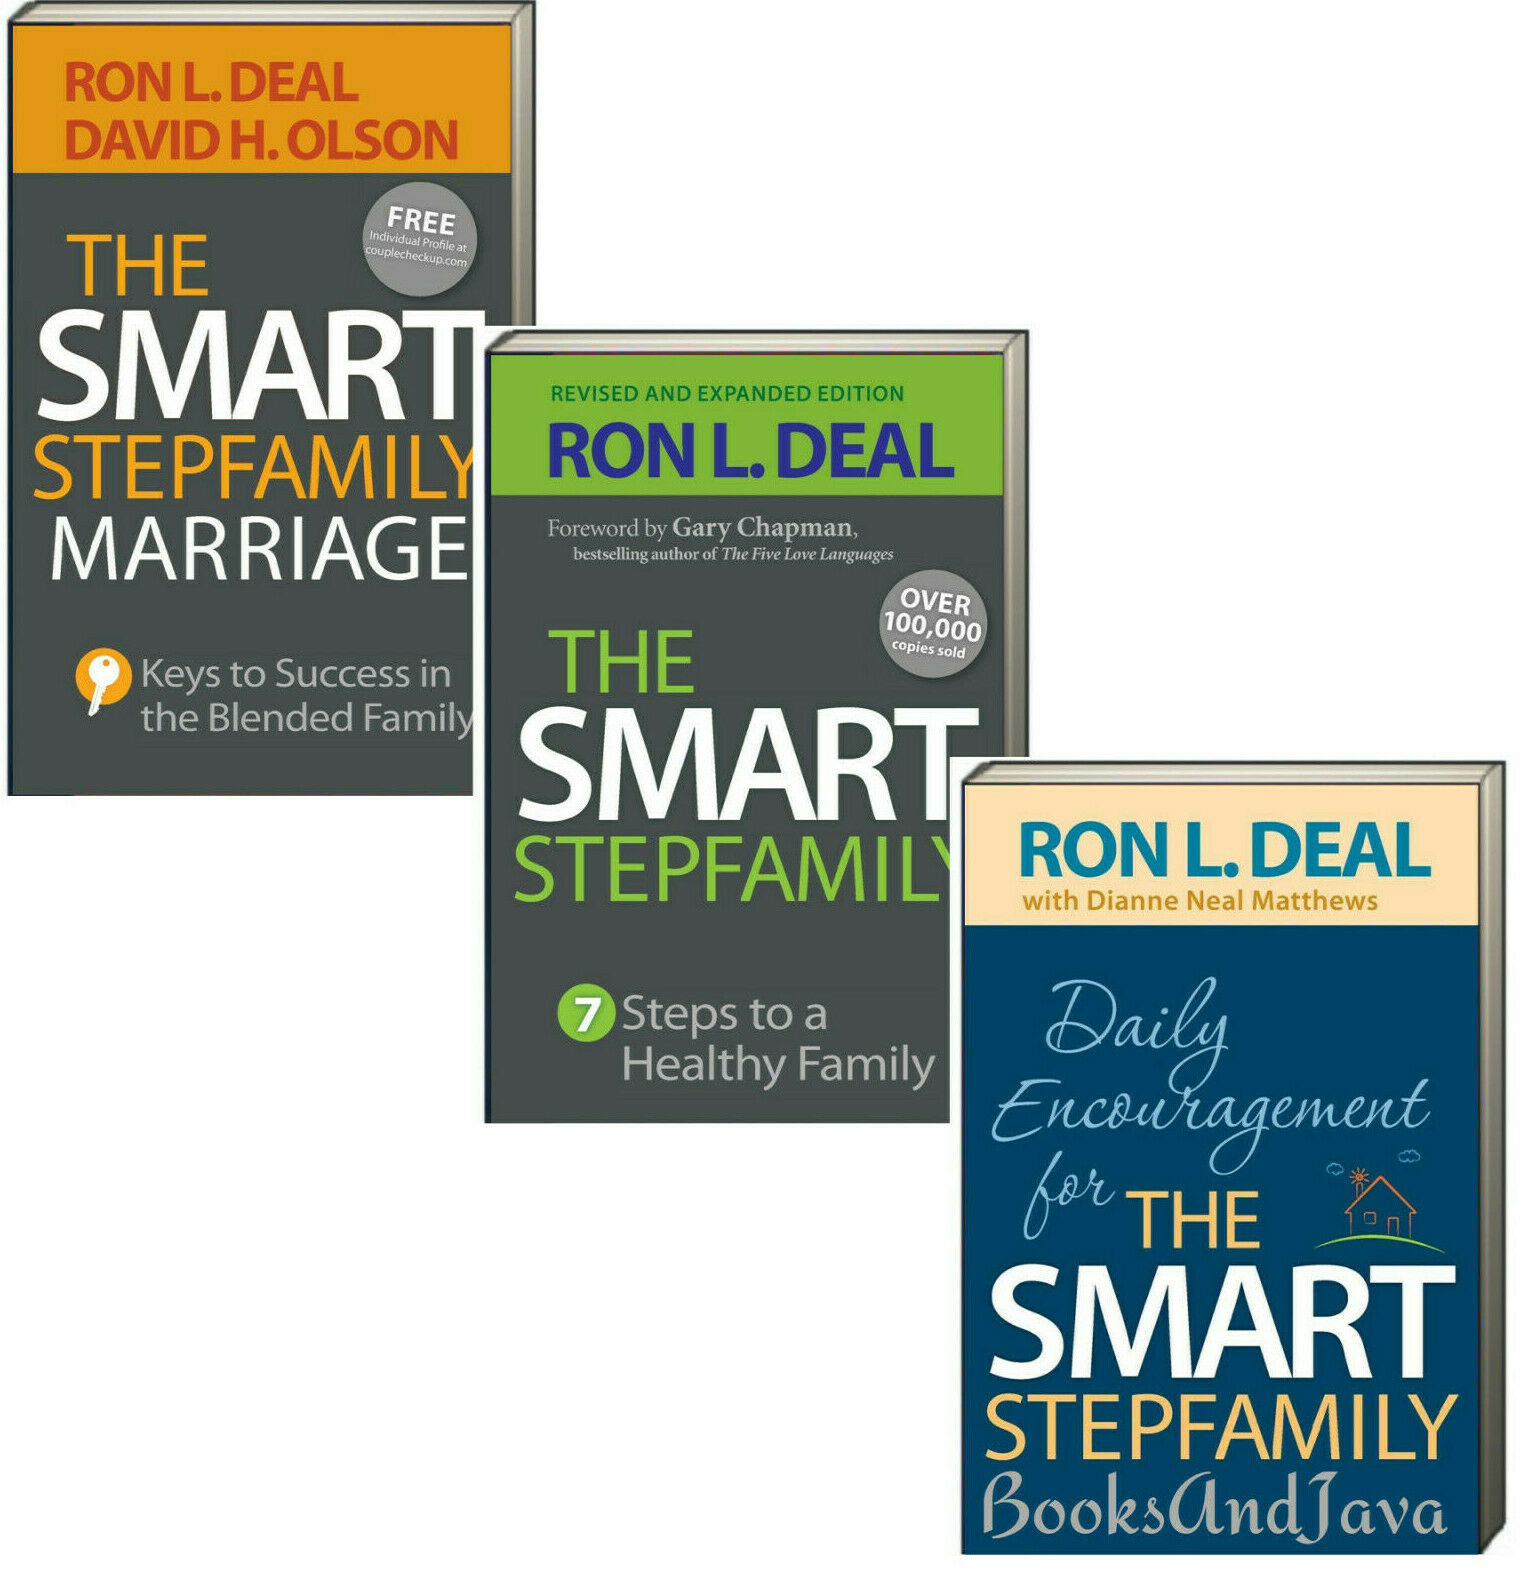 Smart Stepfamily, Stepfamily Marriage & Daily Encouragement by Ron L Deal